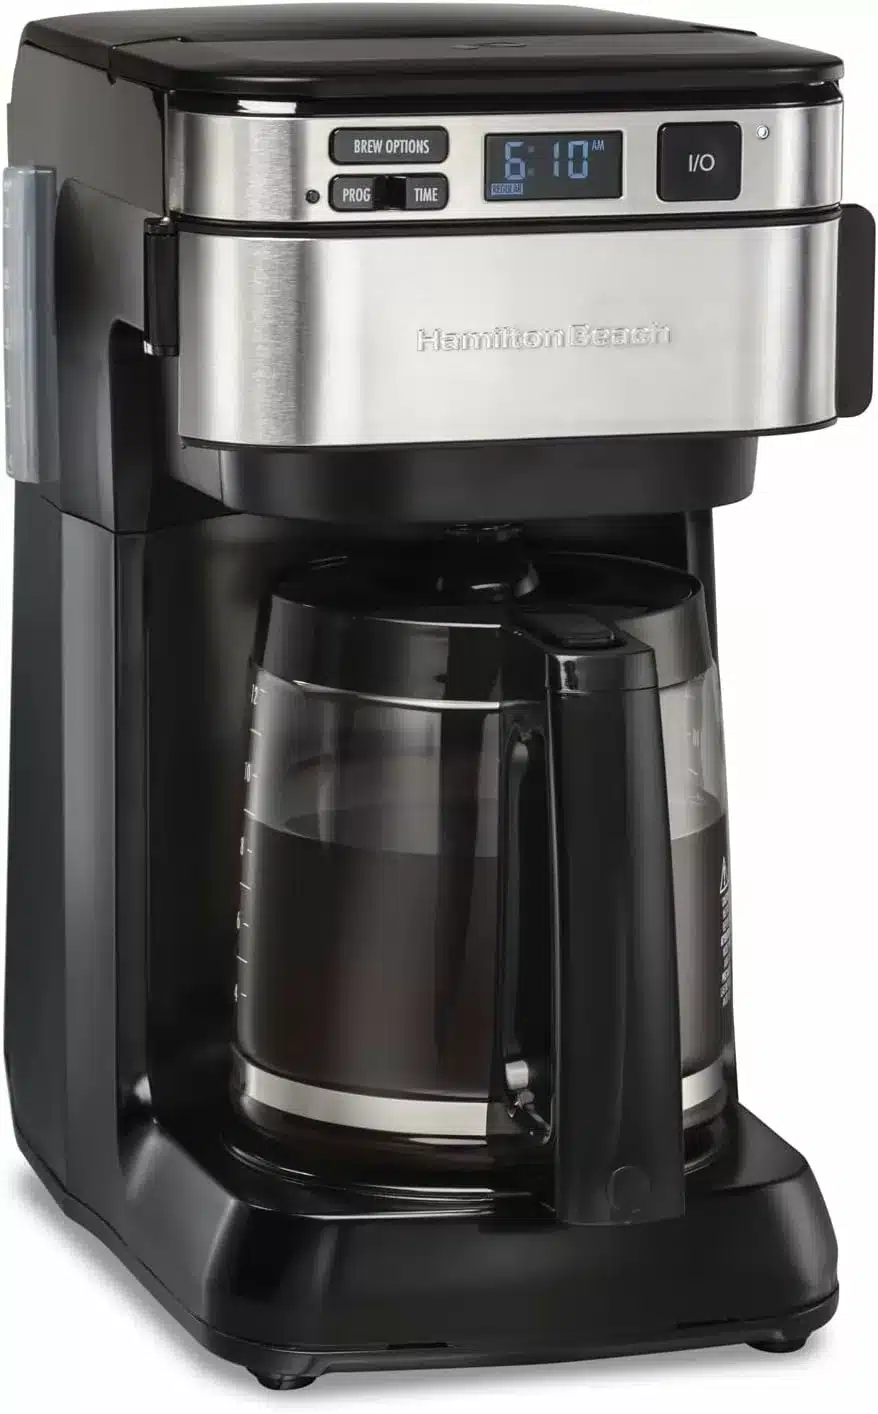 Black and silver coffee maker with a glass coffee pot filled with black coffee